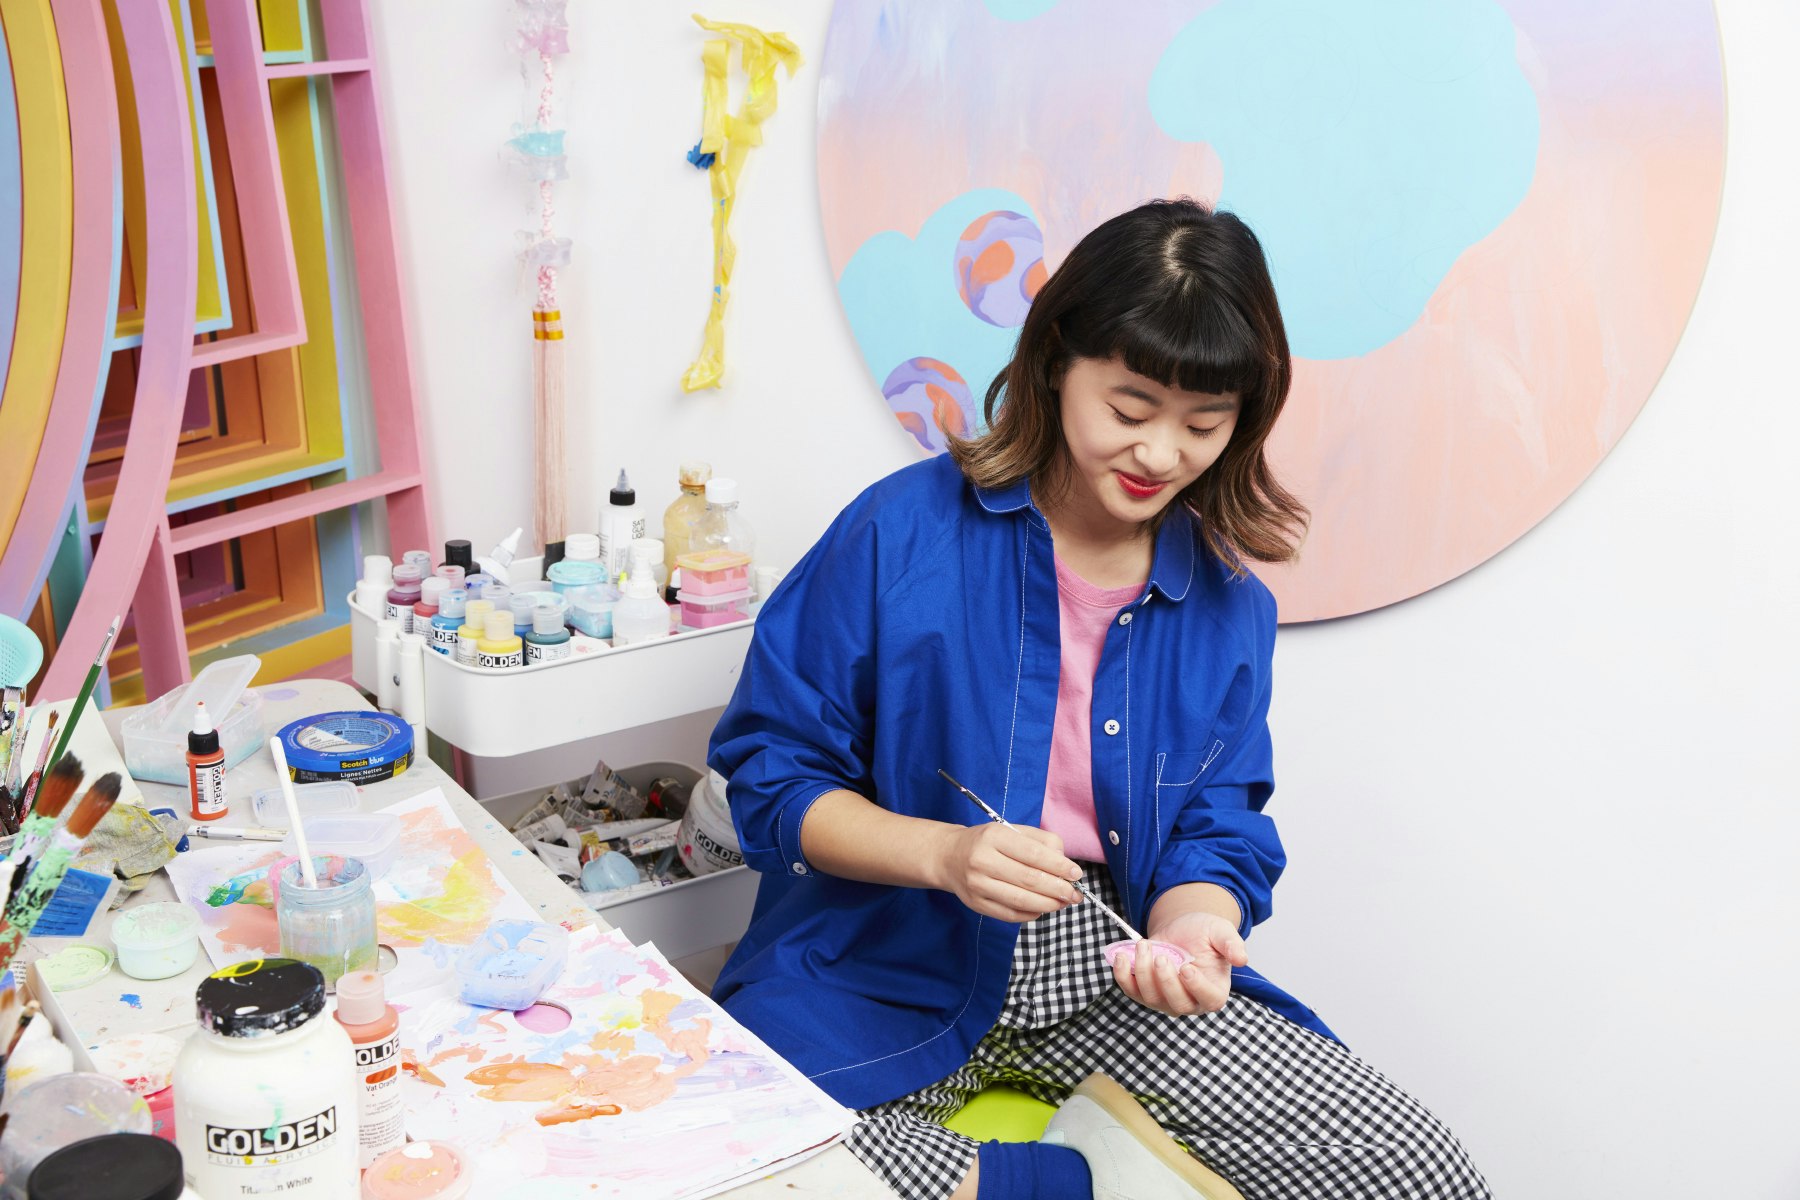 Media Release: Louise Zhang's first solo exhibition at 4A 